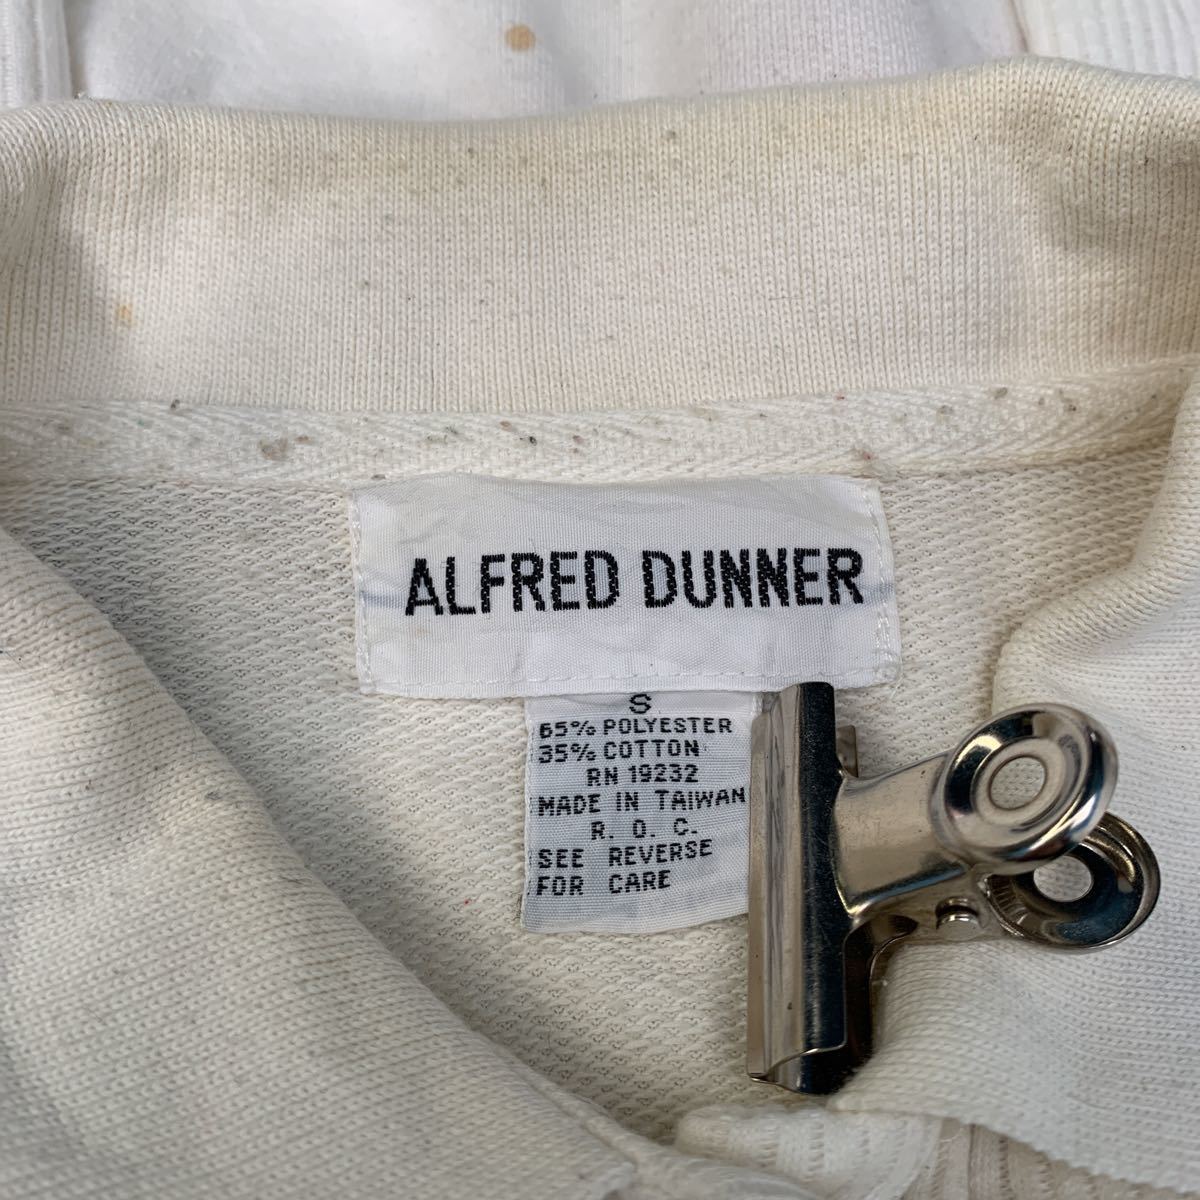 ALFRED DUNNER half button sweat pull over wi men's S ivory blue red retro old clothes . America buying up a502-5512